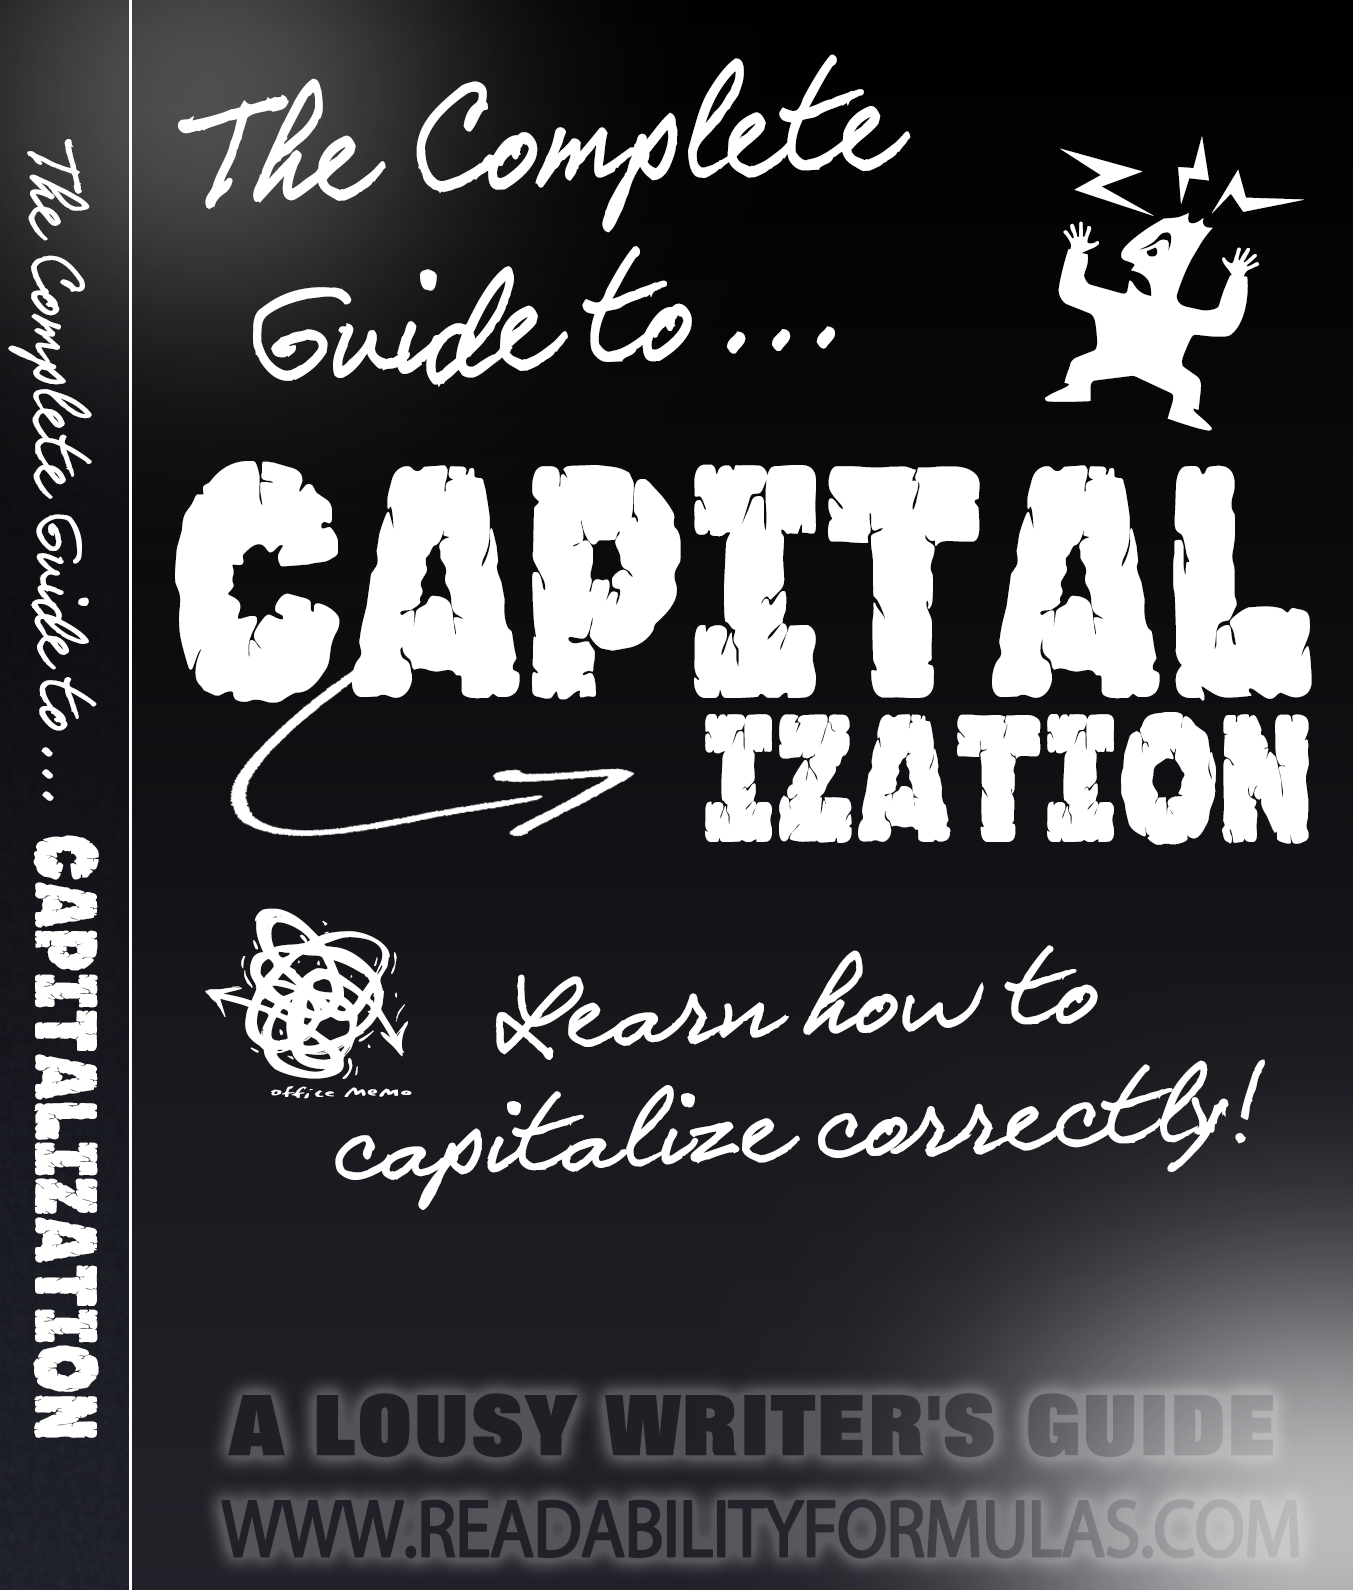 The Complete Guide To Capitalization Free Ebook